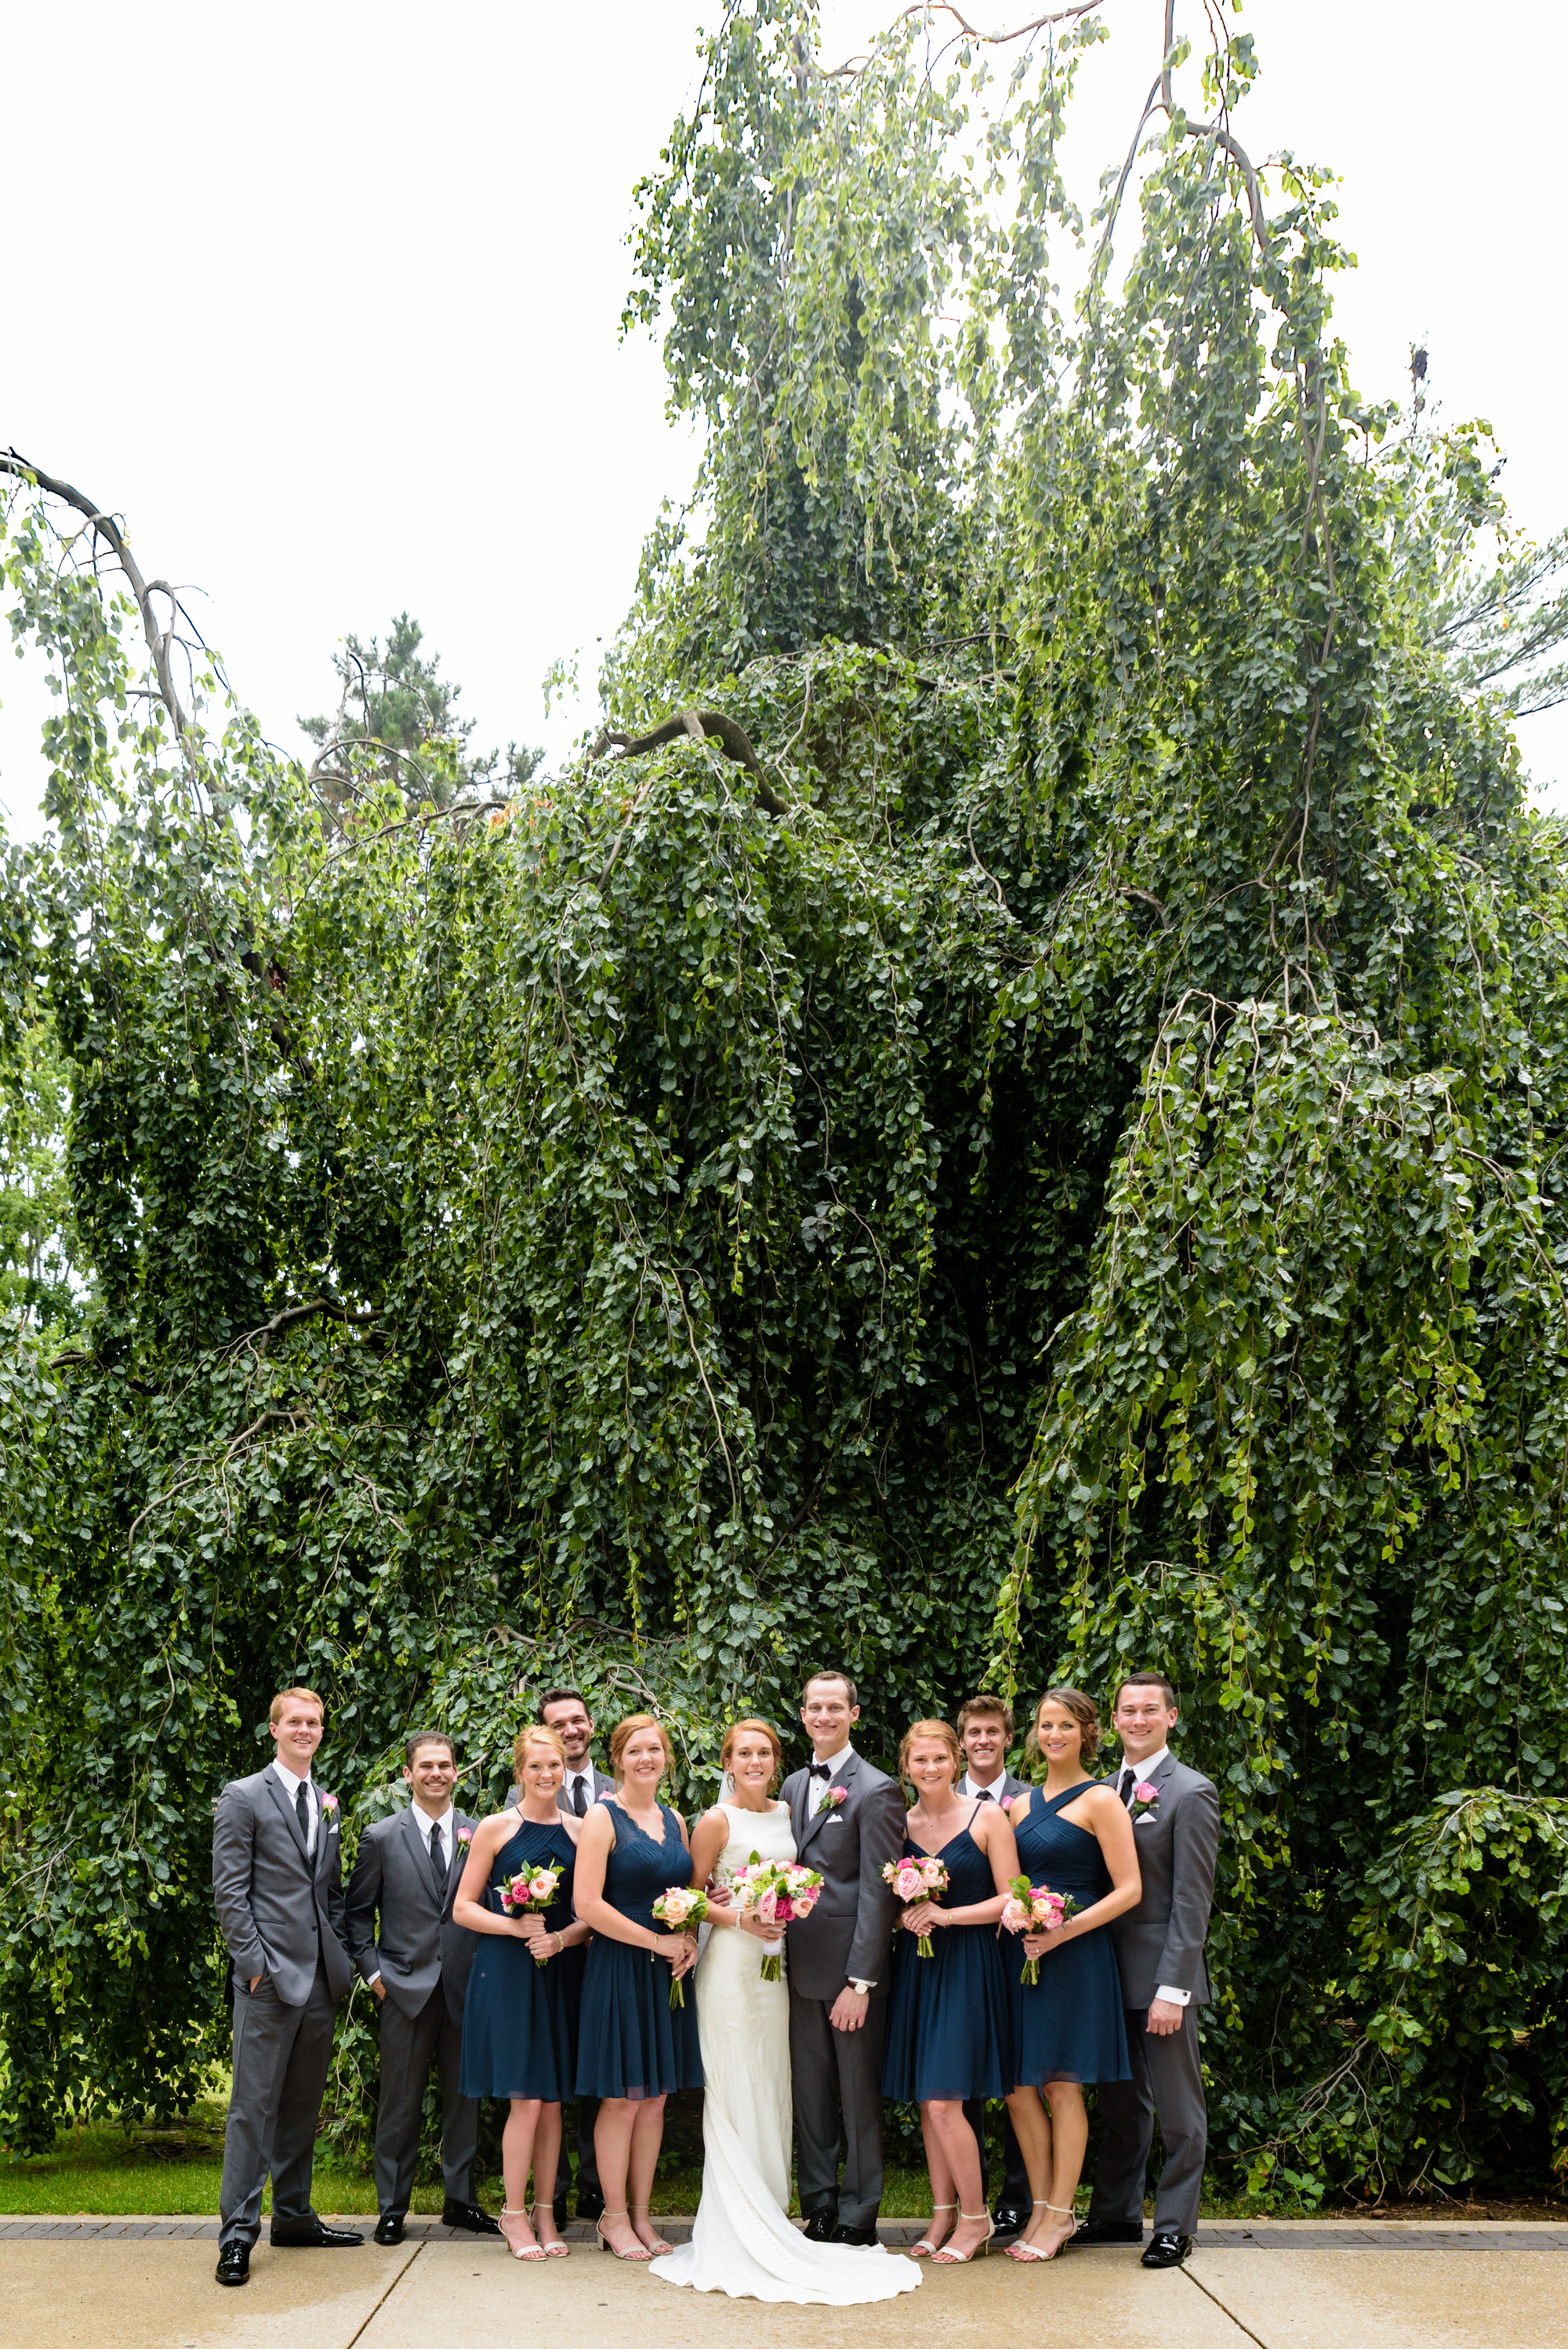 Bridal Party in front of an exotic California inspired tree after a wedding ceremony at the Basilica of the Sacred Heart on the campus of the University of Notre Dame